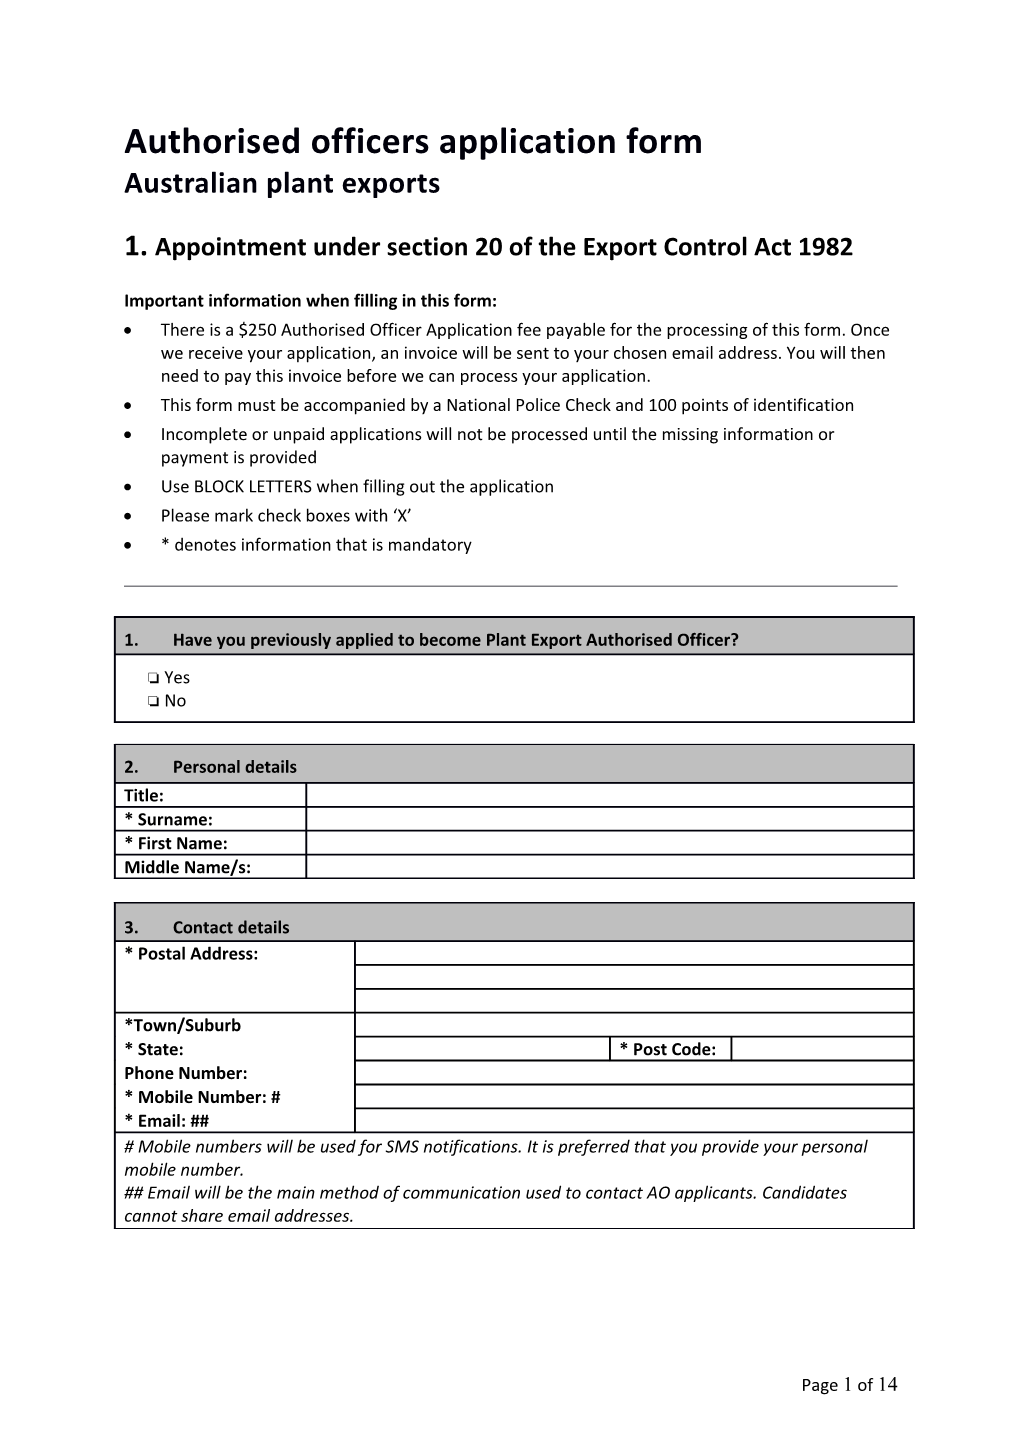 Authorised Officers Application Form